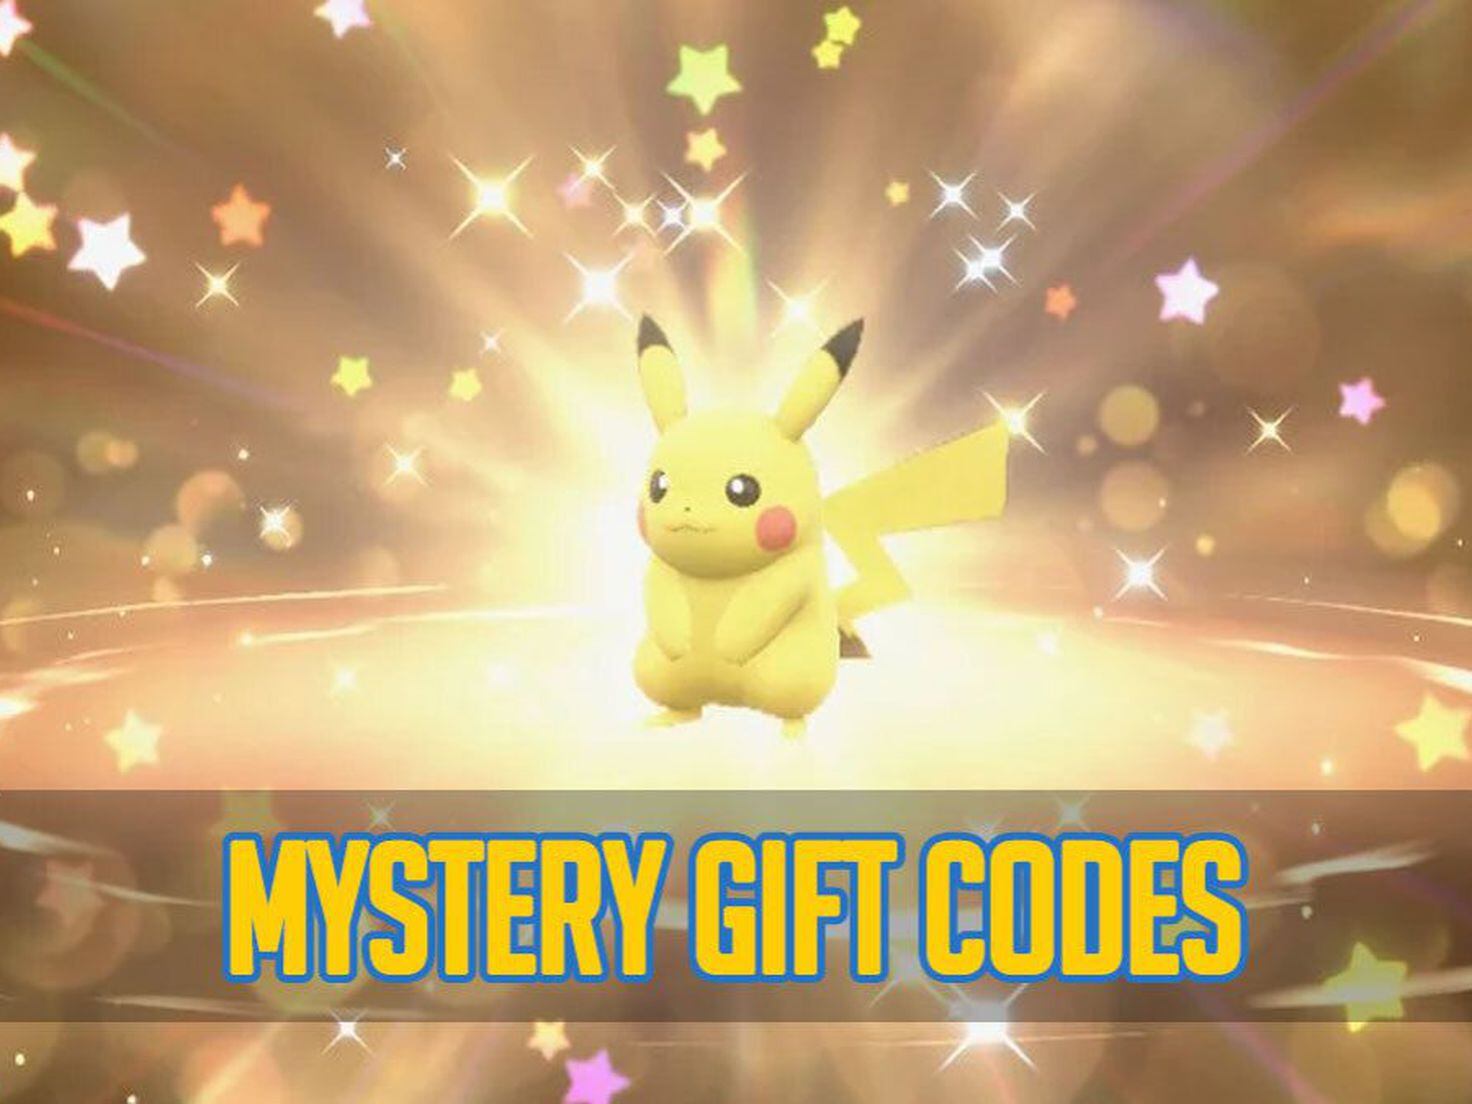 Get A Flying Pikachu In The First Limited-Time Pokemon Scarlet And